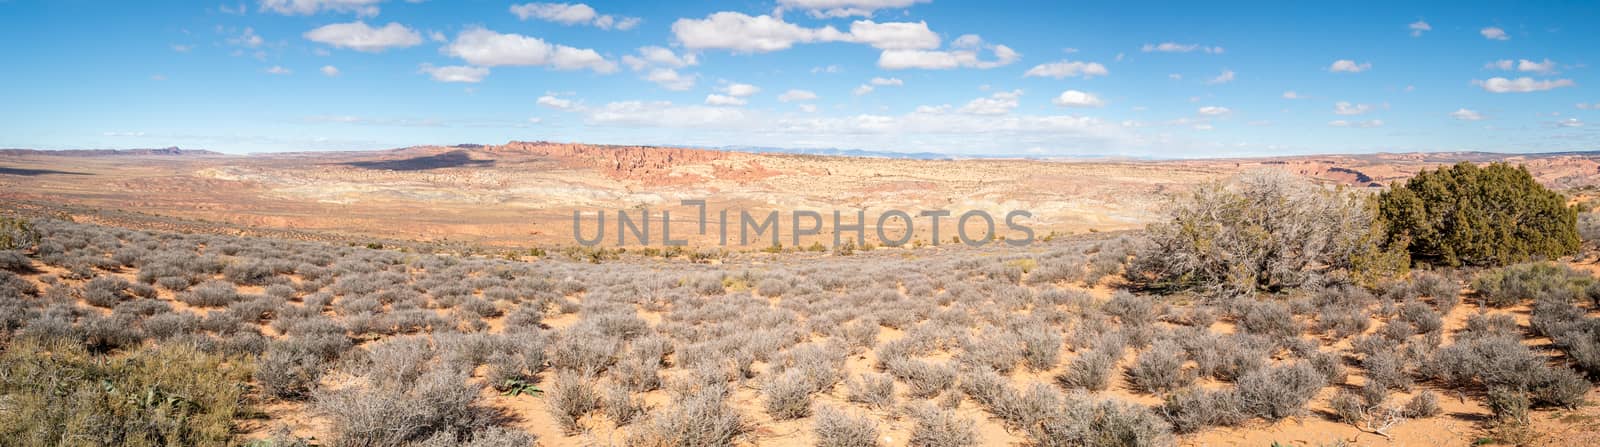 Navajo sandstone Desert Panorama landscape. Typical American beauty in nature. by kb79